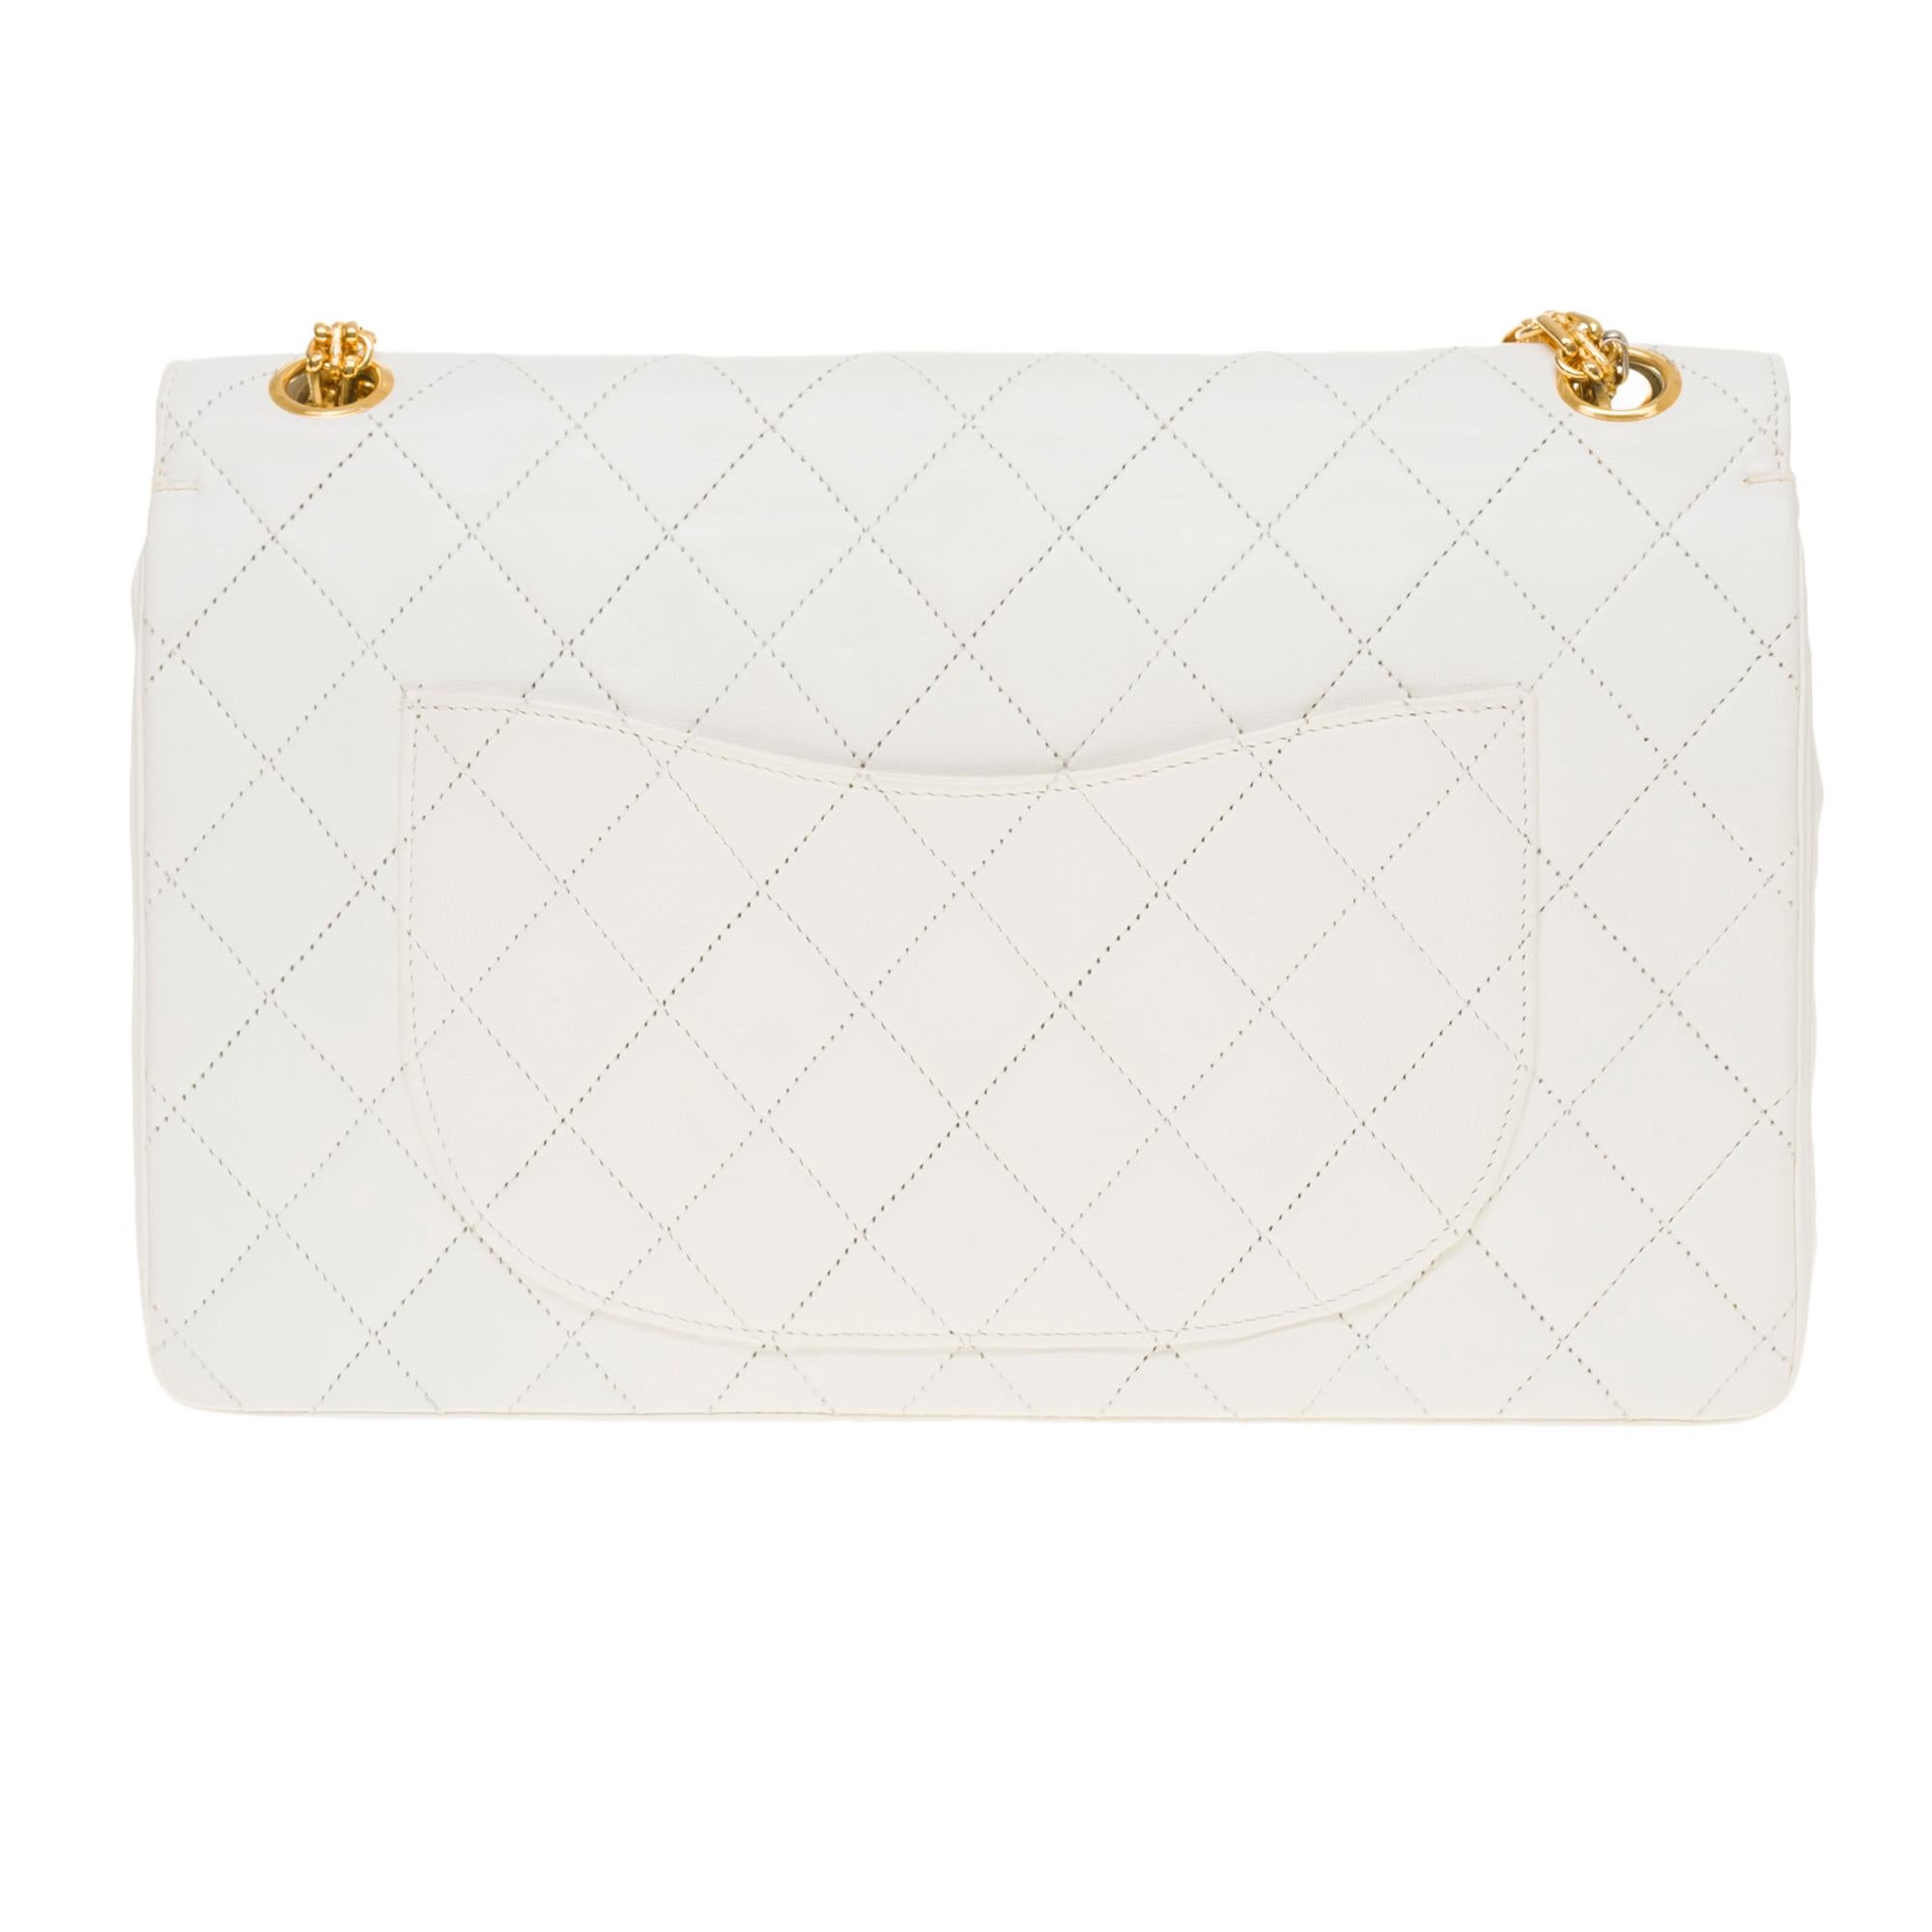 Exceptional Chanel Timeless/Classique handbag with double flap in white quilted lambskin leather, gold metal hardware, a Mademoiselle chain handle in gold metal allowing a hand or shoulder support
Closure with gold metal flap
A patch pocket on the